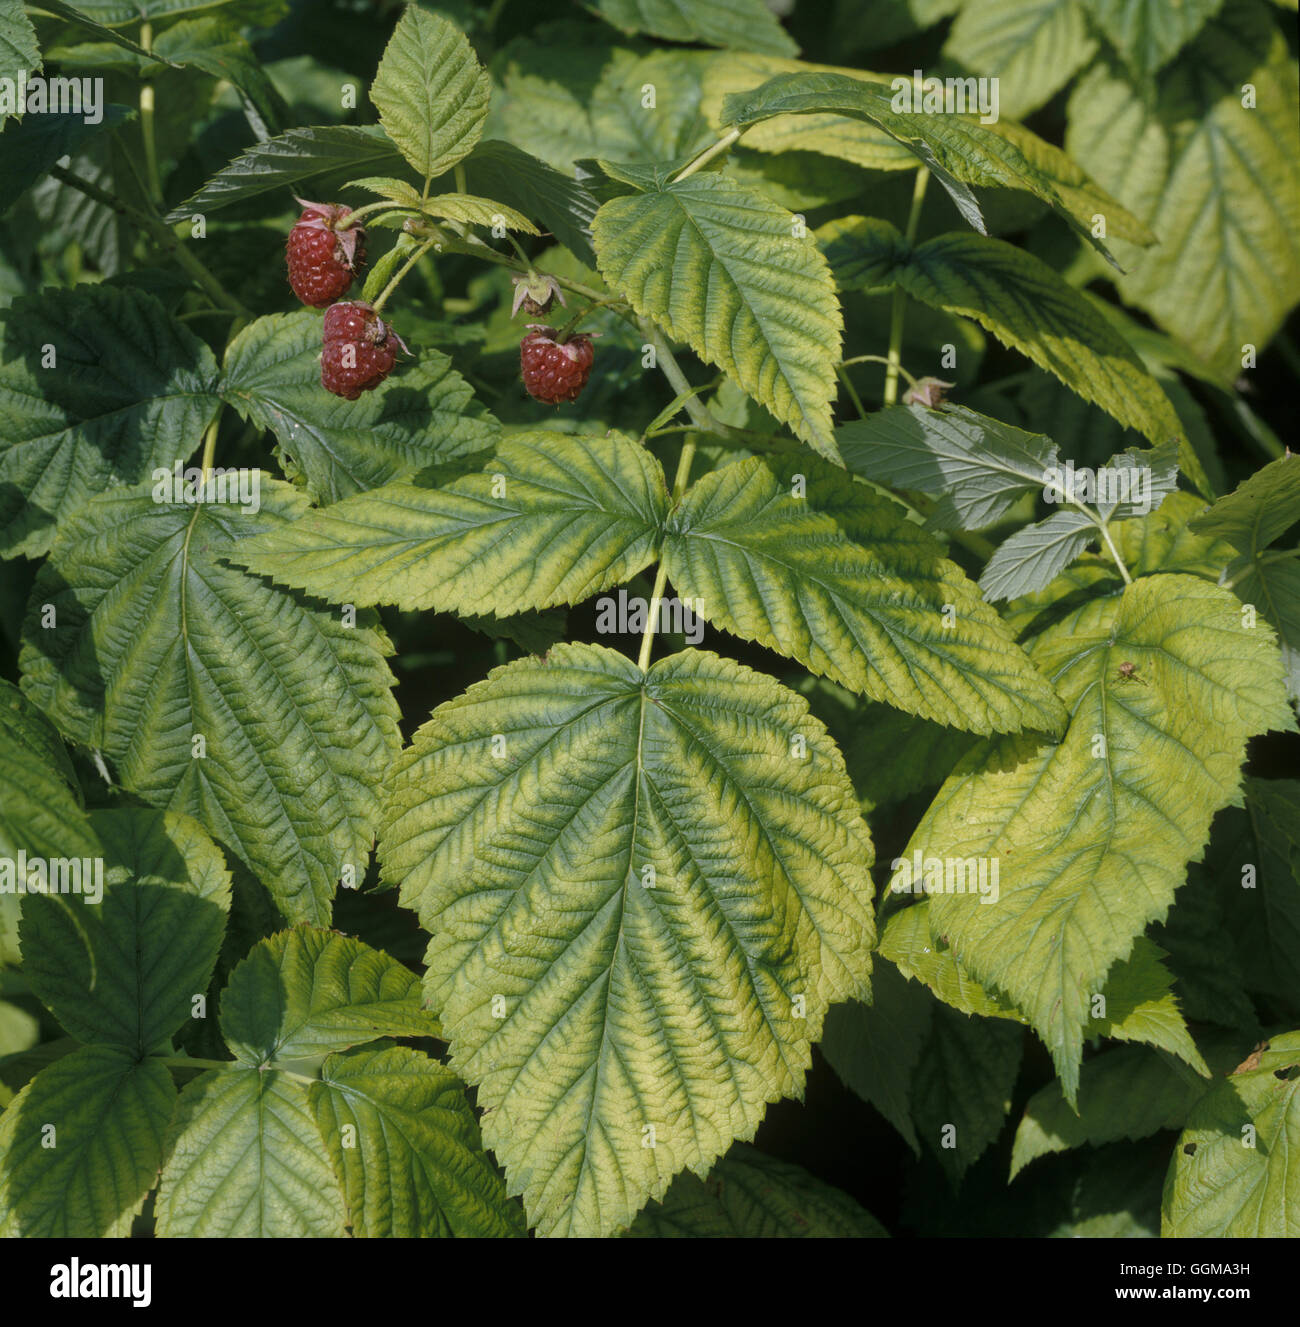 Mineral Deficiency - Lime induced Chlorosis causing Iron deficiency on Raspberry. Stock Photo